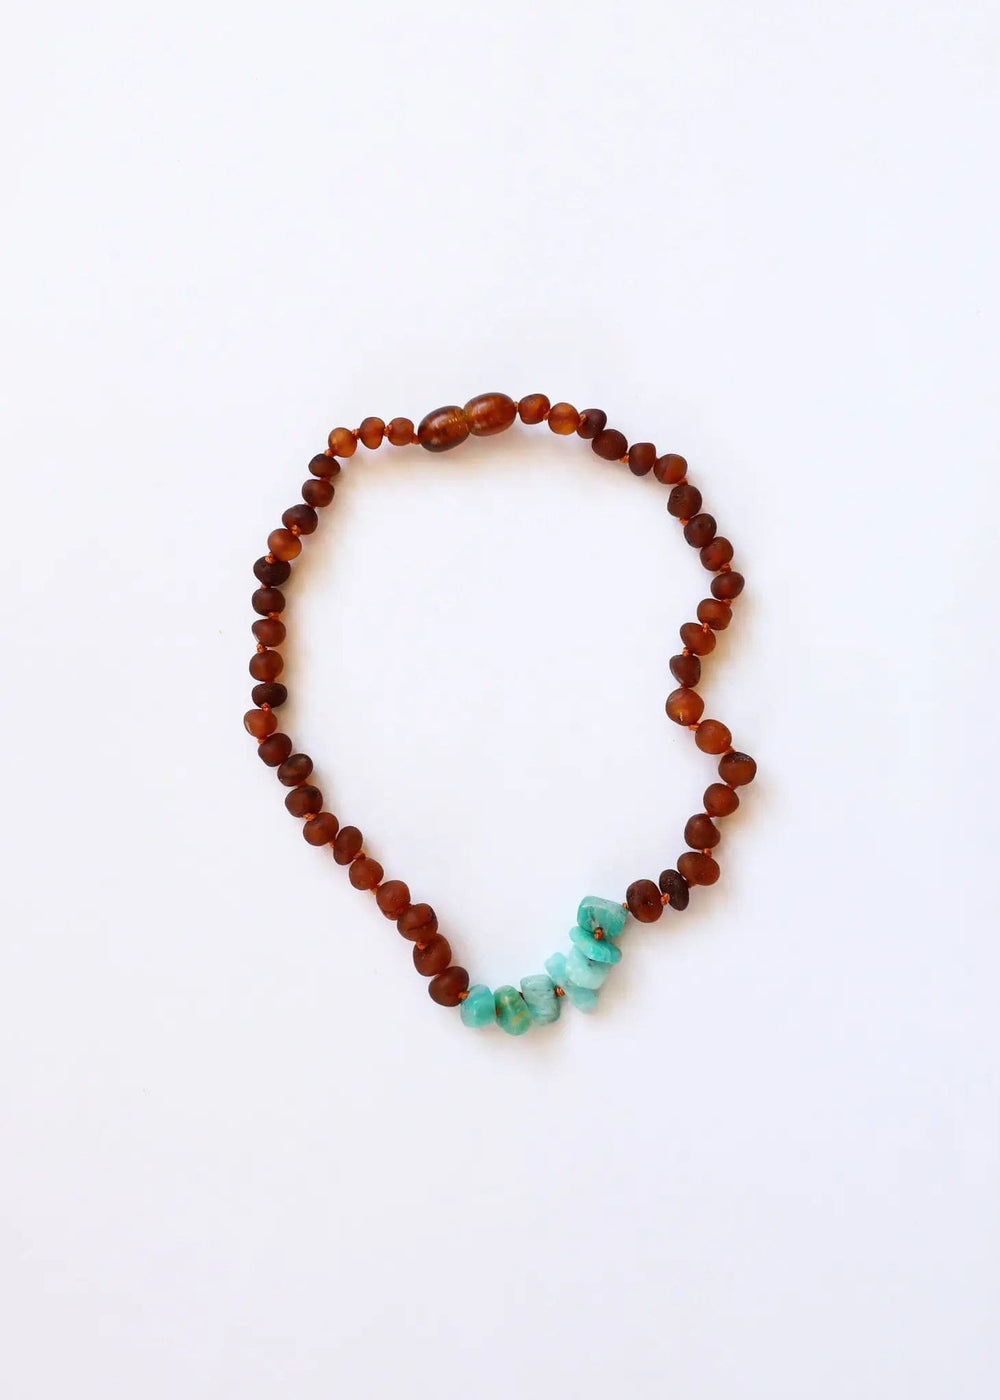 Raw Cognac Amber + Raw Amazonite Necklace Canyon Leaf Lil Tulips